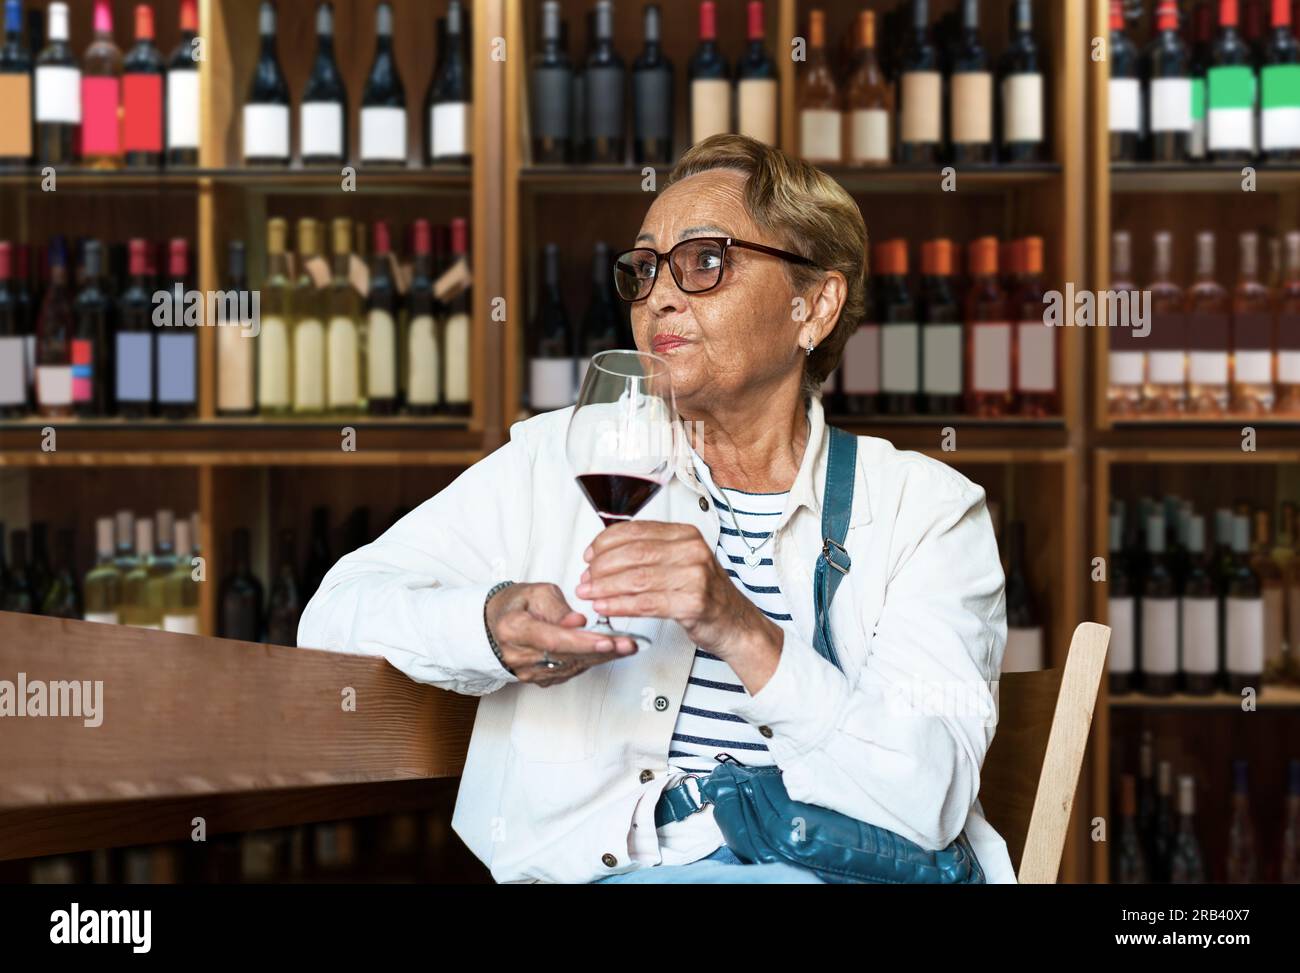 Short hair elderly woman wearing sunglasses tasting red wine in a wine boutique. Stock Photo